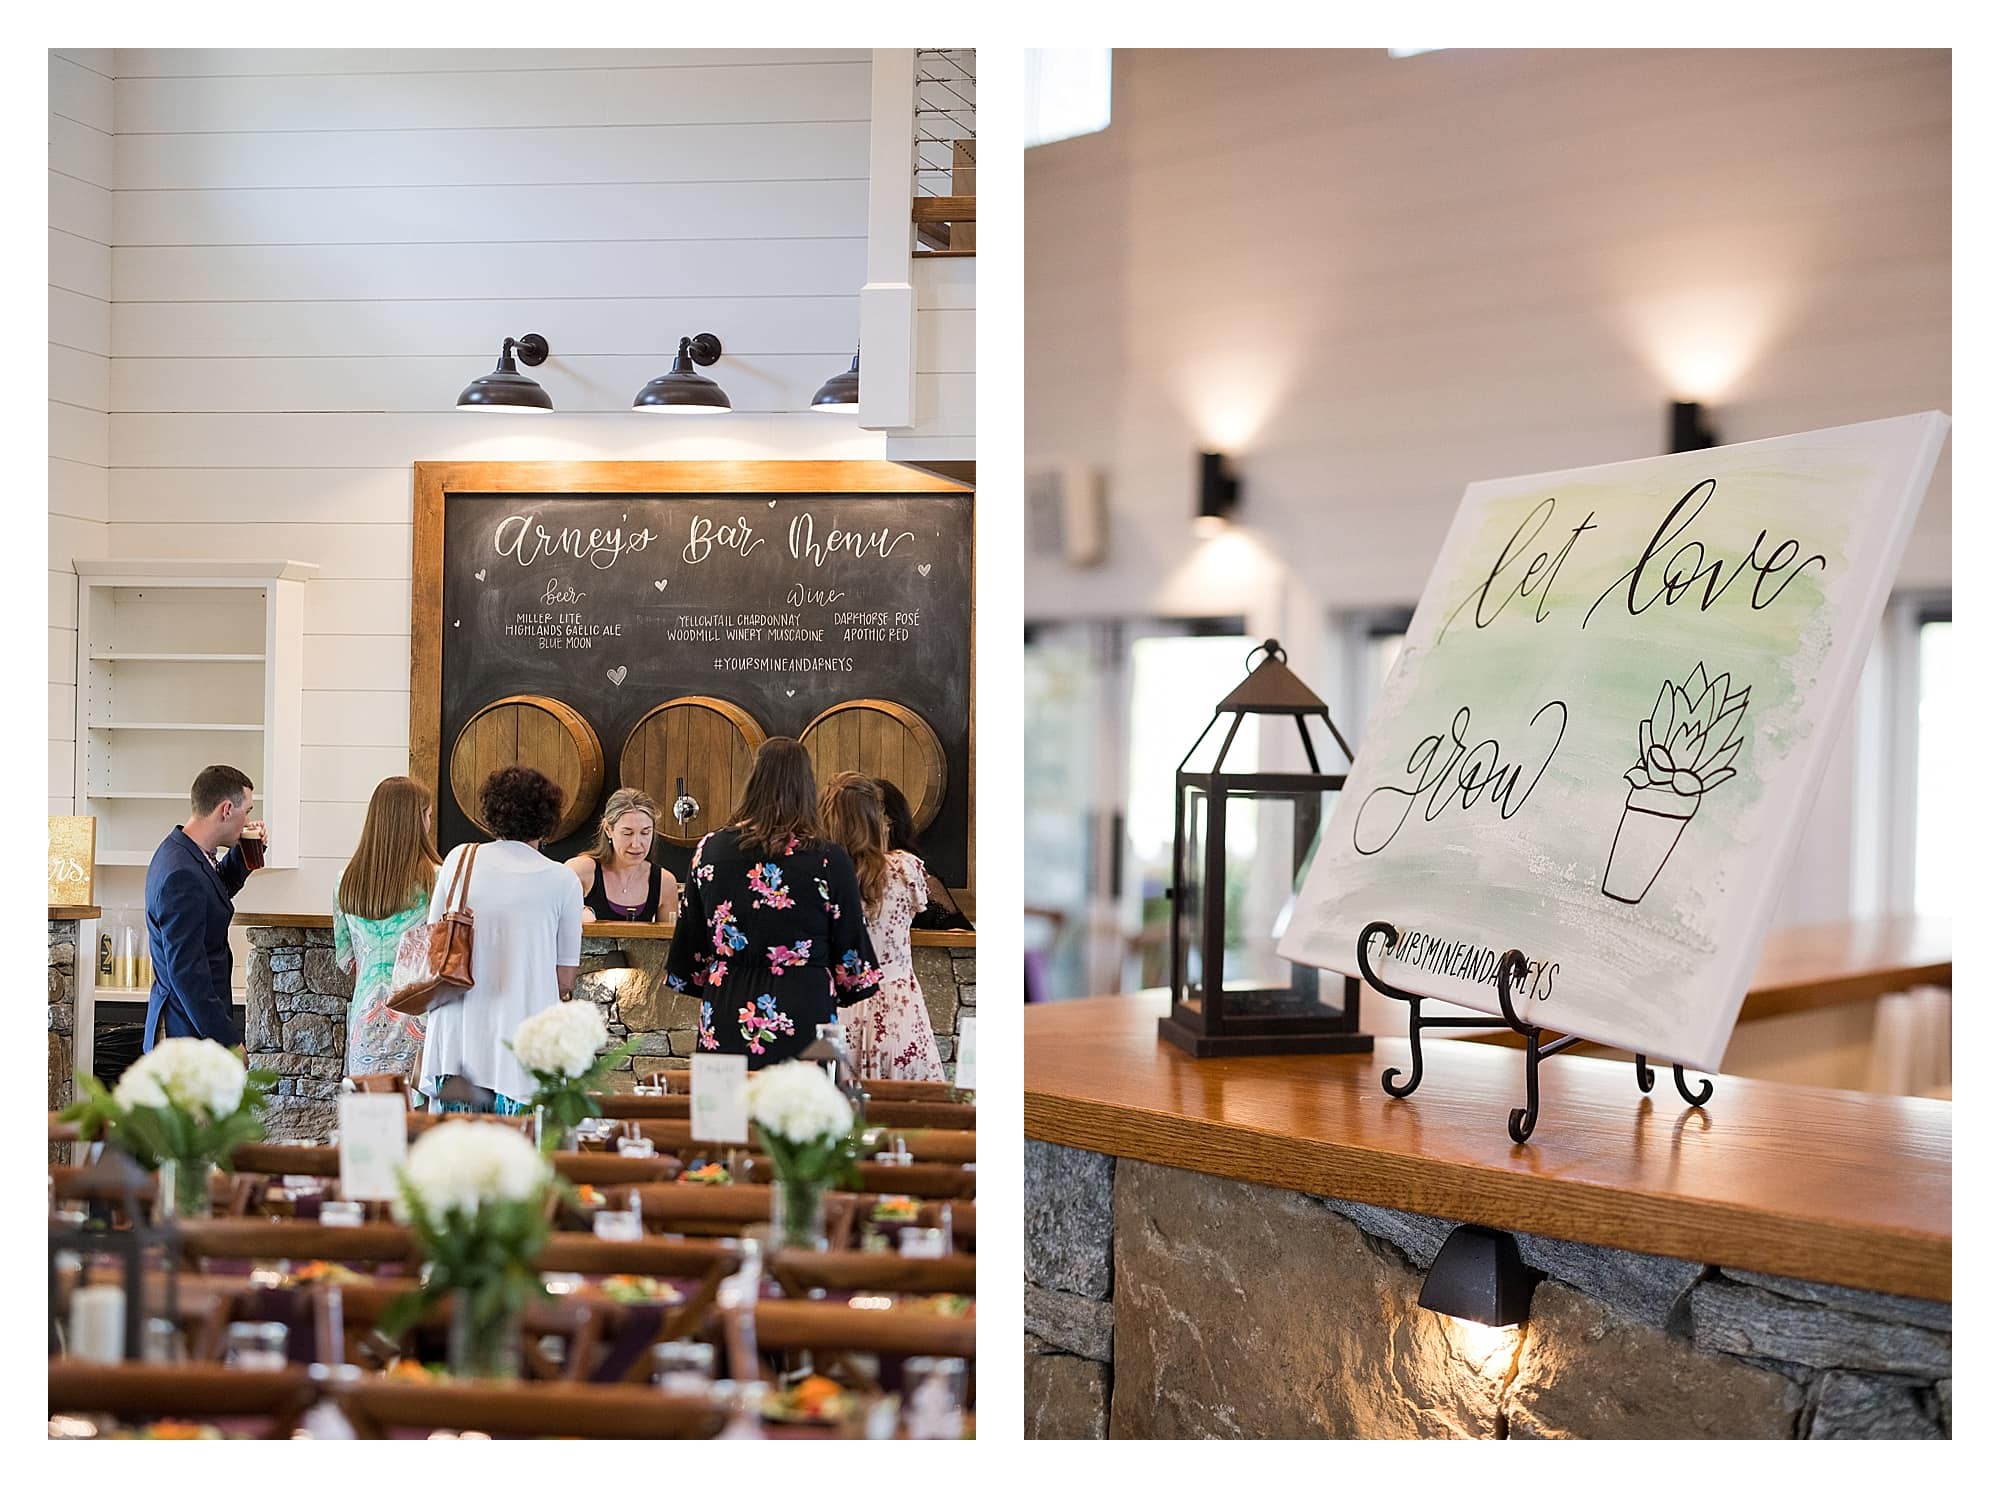 hand lettered chalkboard sign at wedding repection